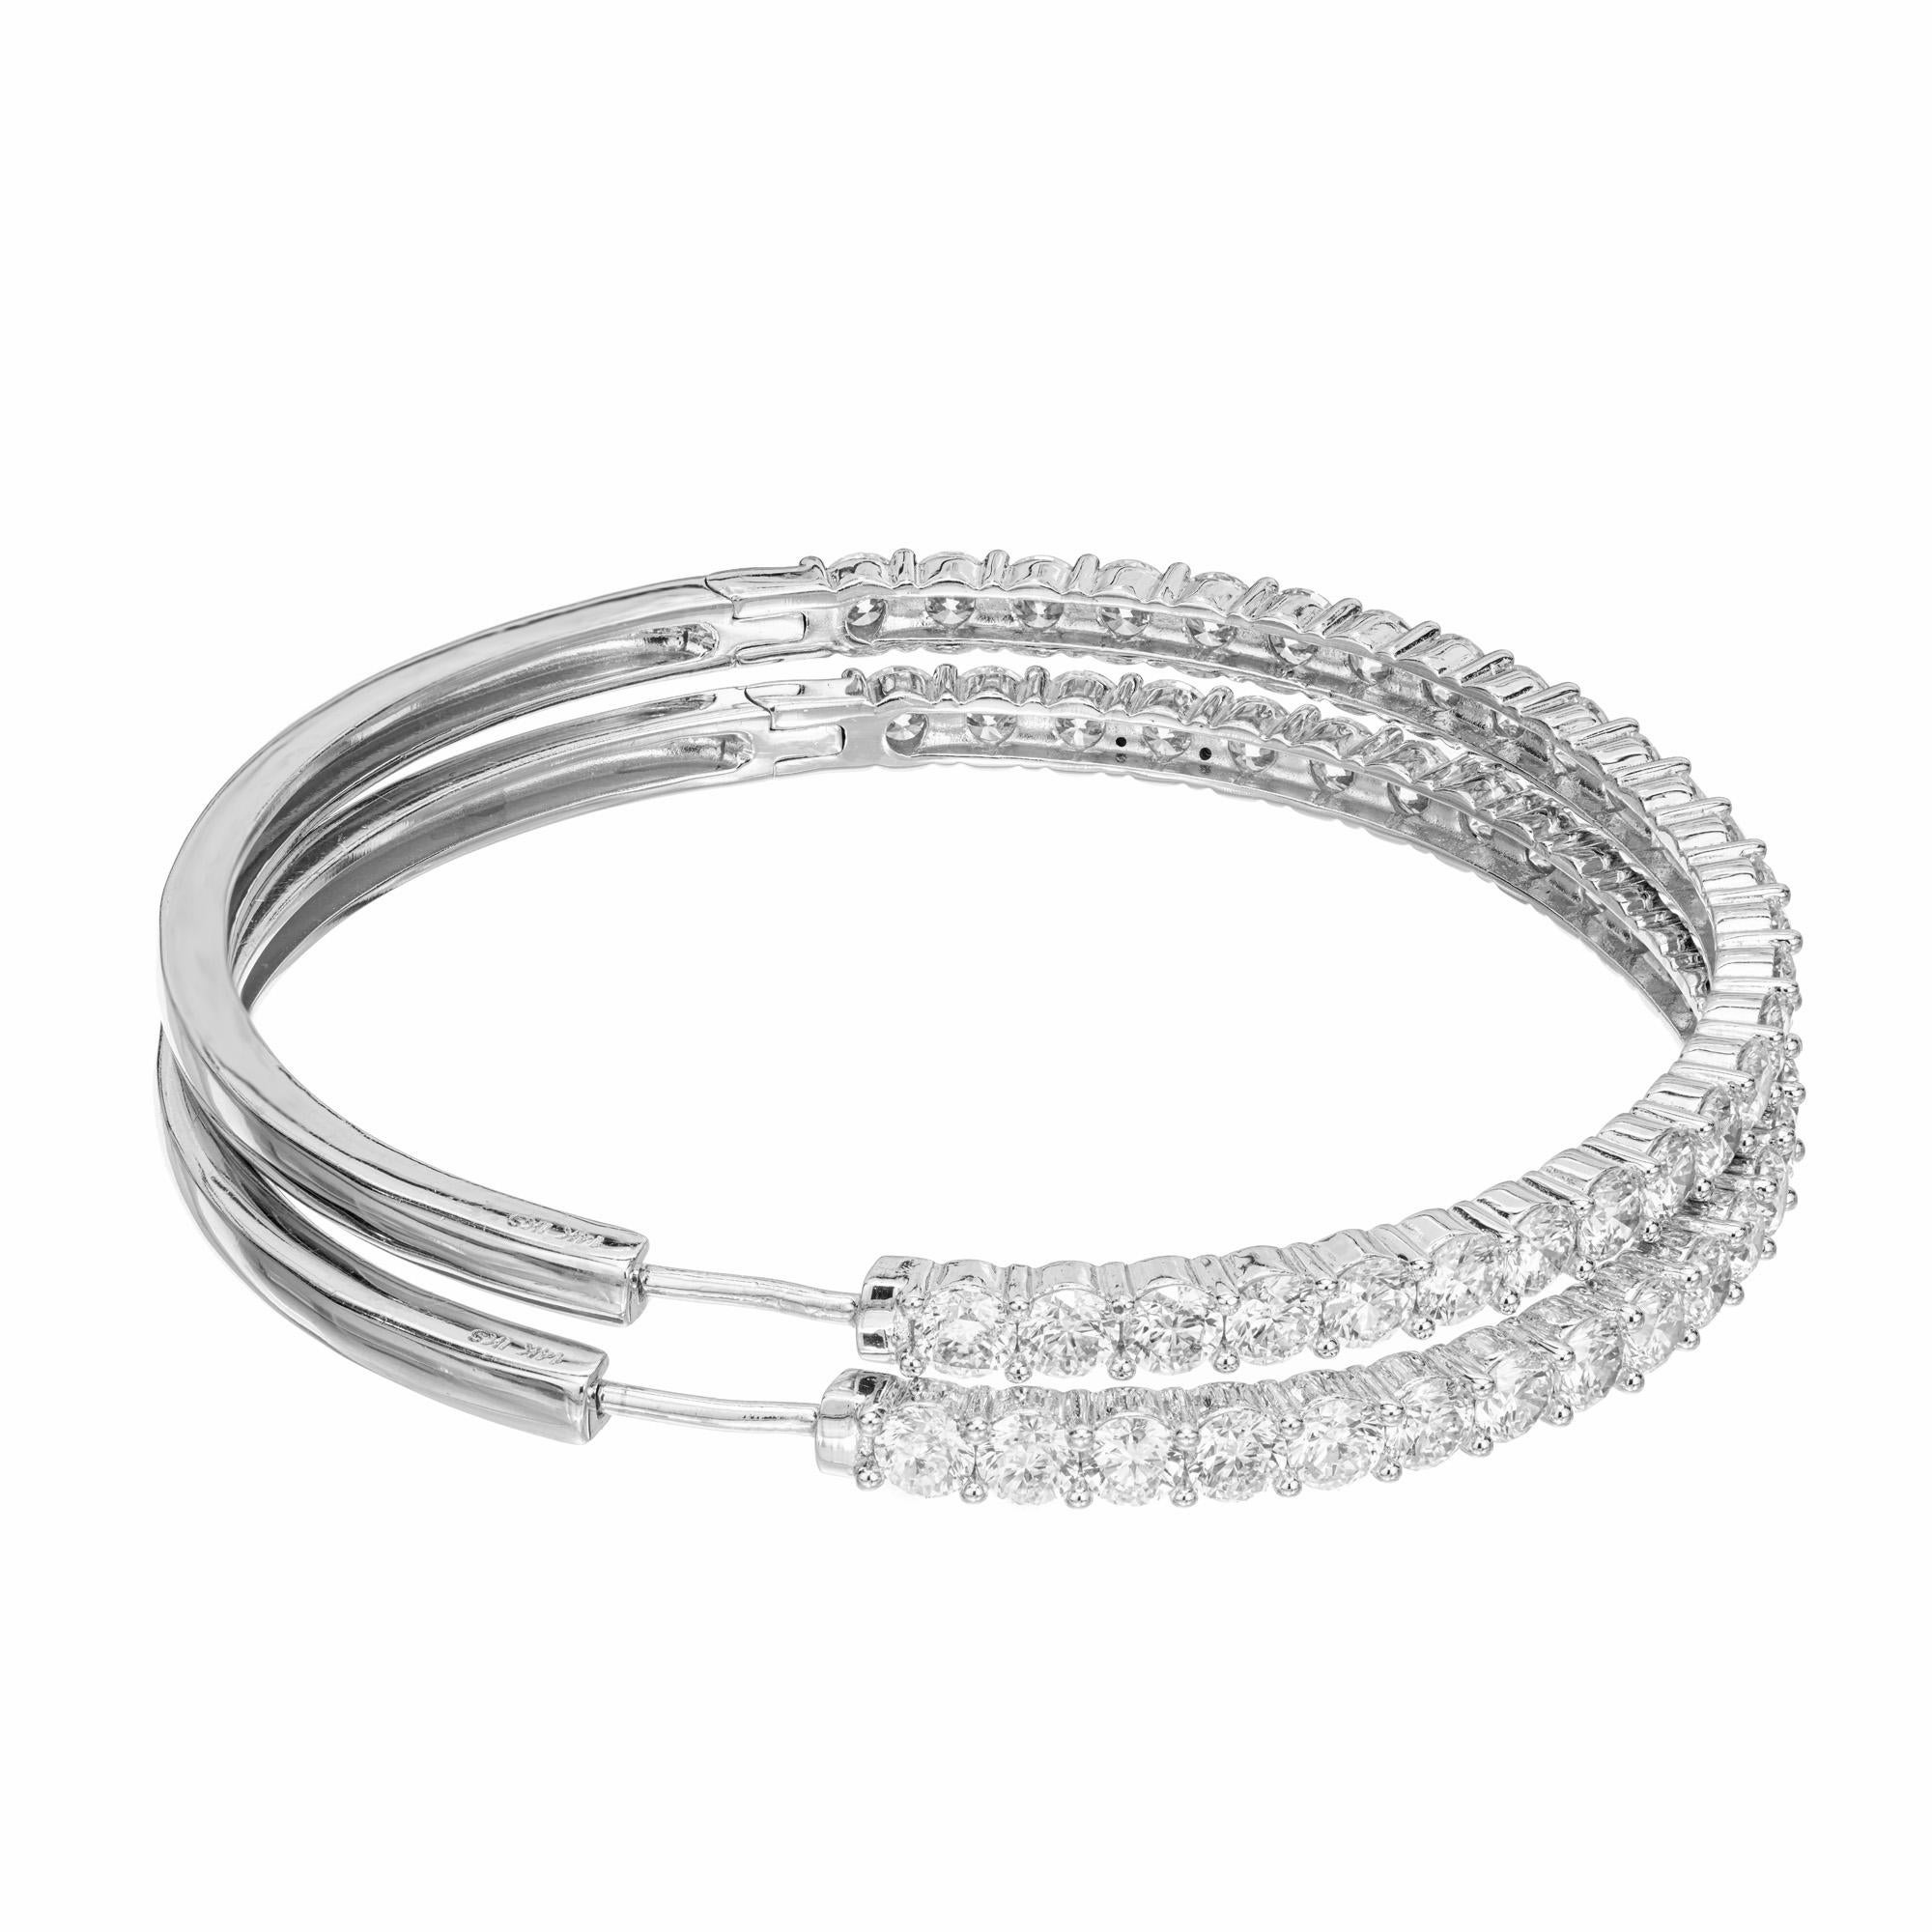 4.00 Carat Diamond White Gold Large Hoop Earrings  In Excellent Condition For Sale In Stamford, CT